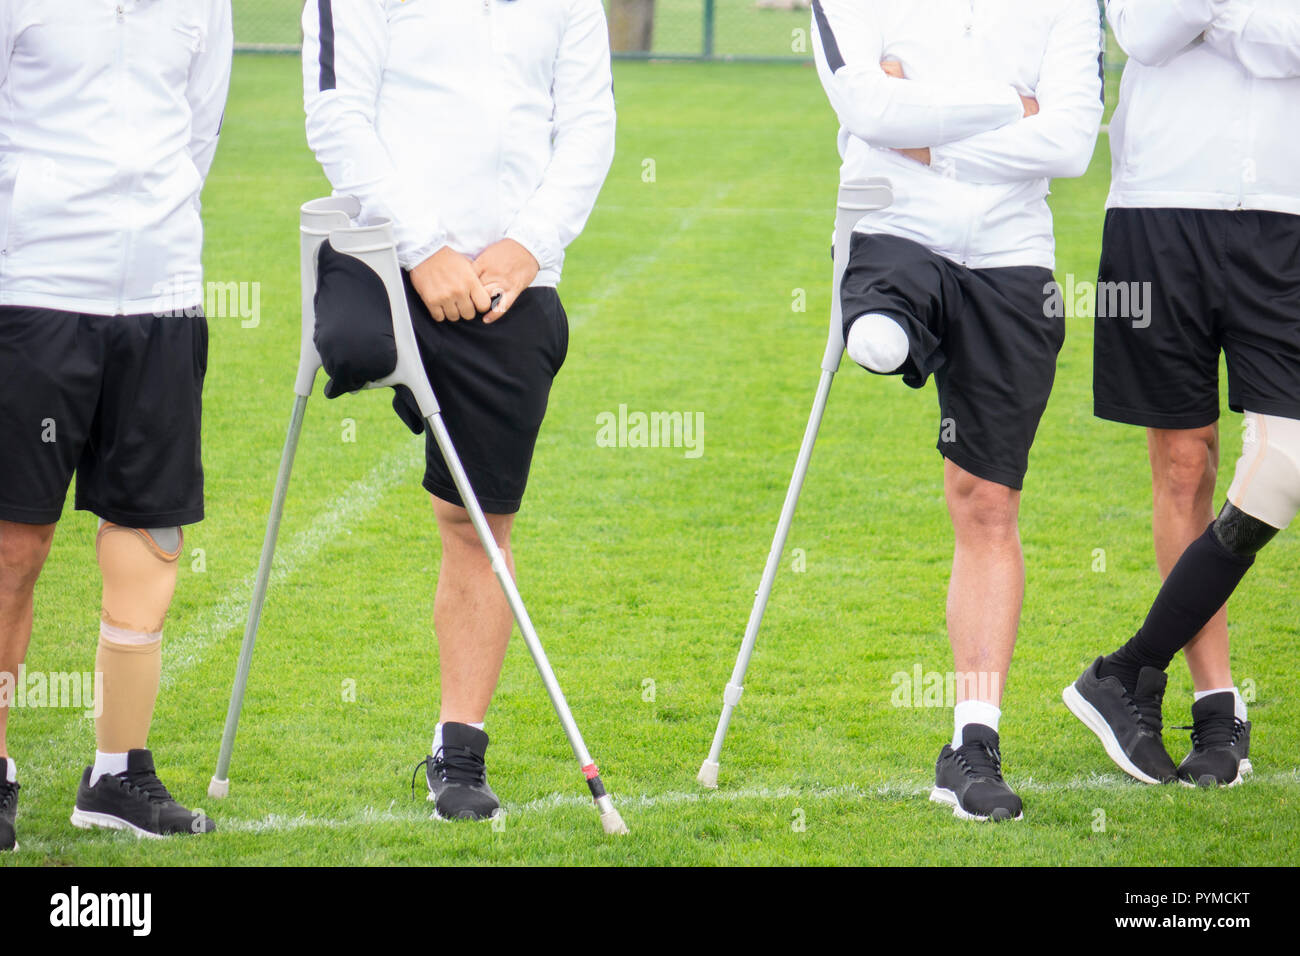 close-up of ampute soccer player and team friends Stock Photo - Alamy